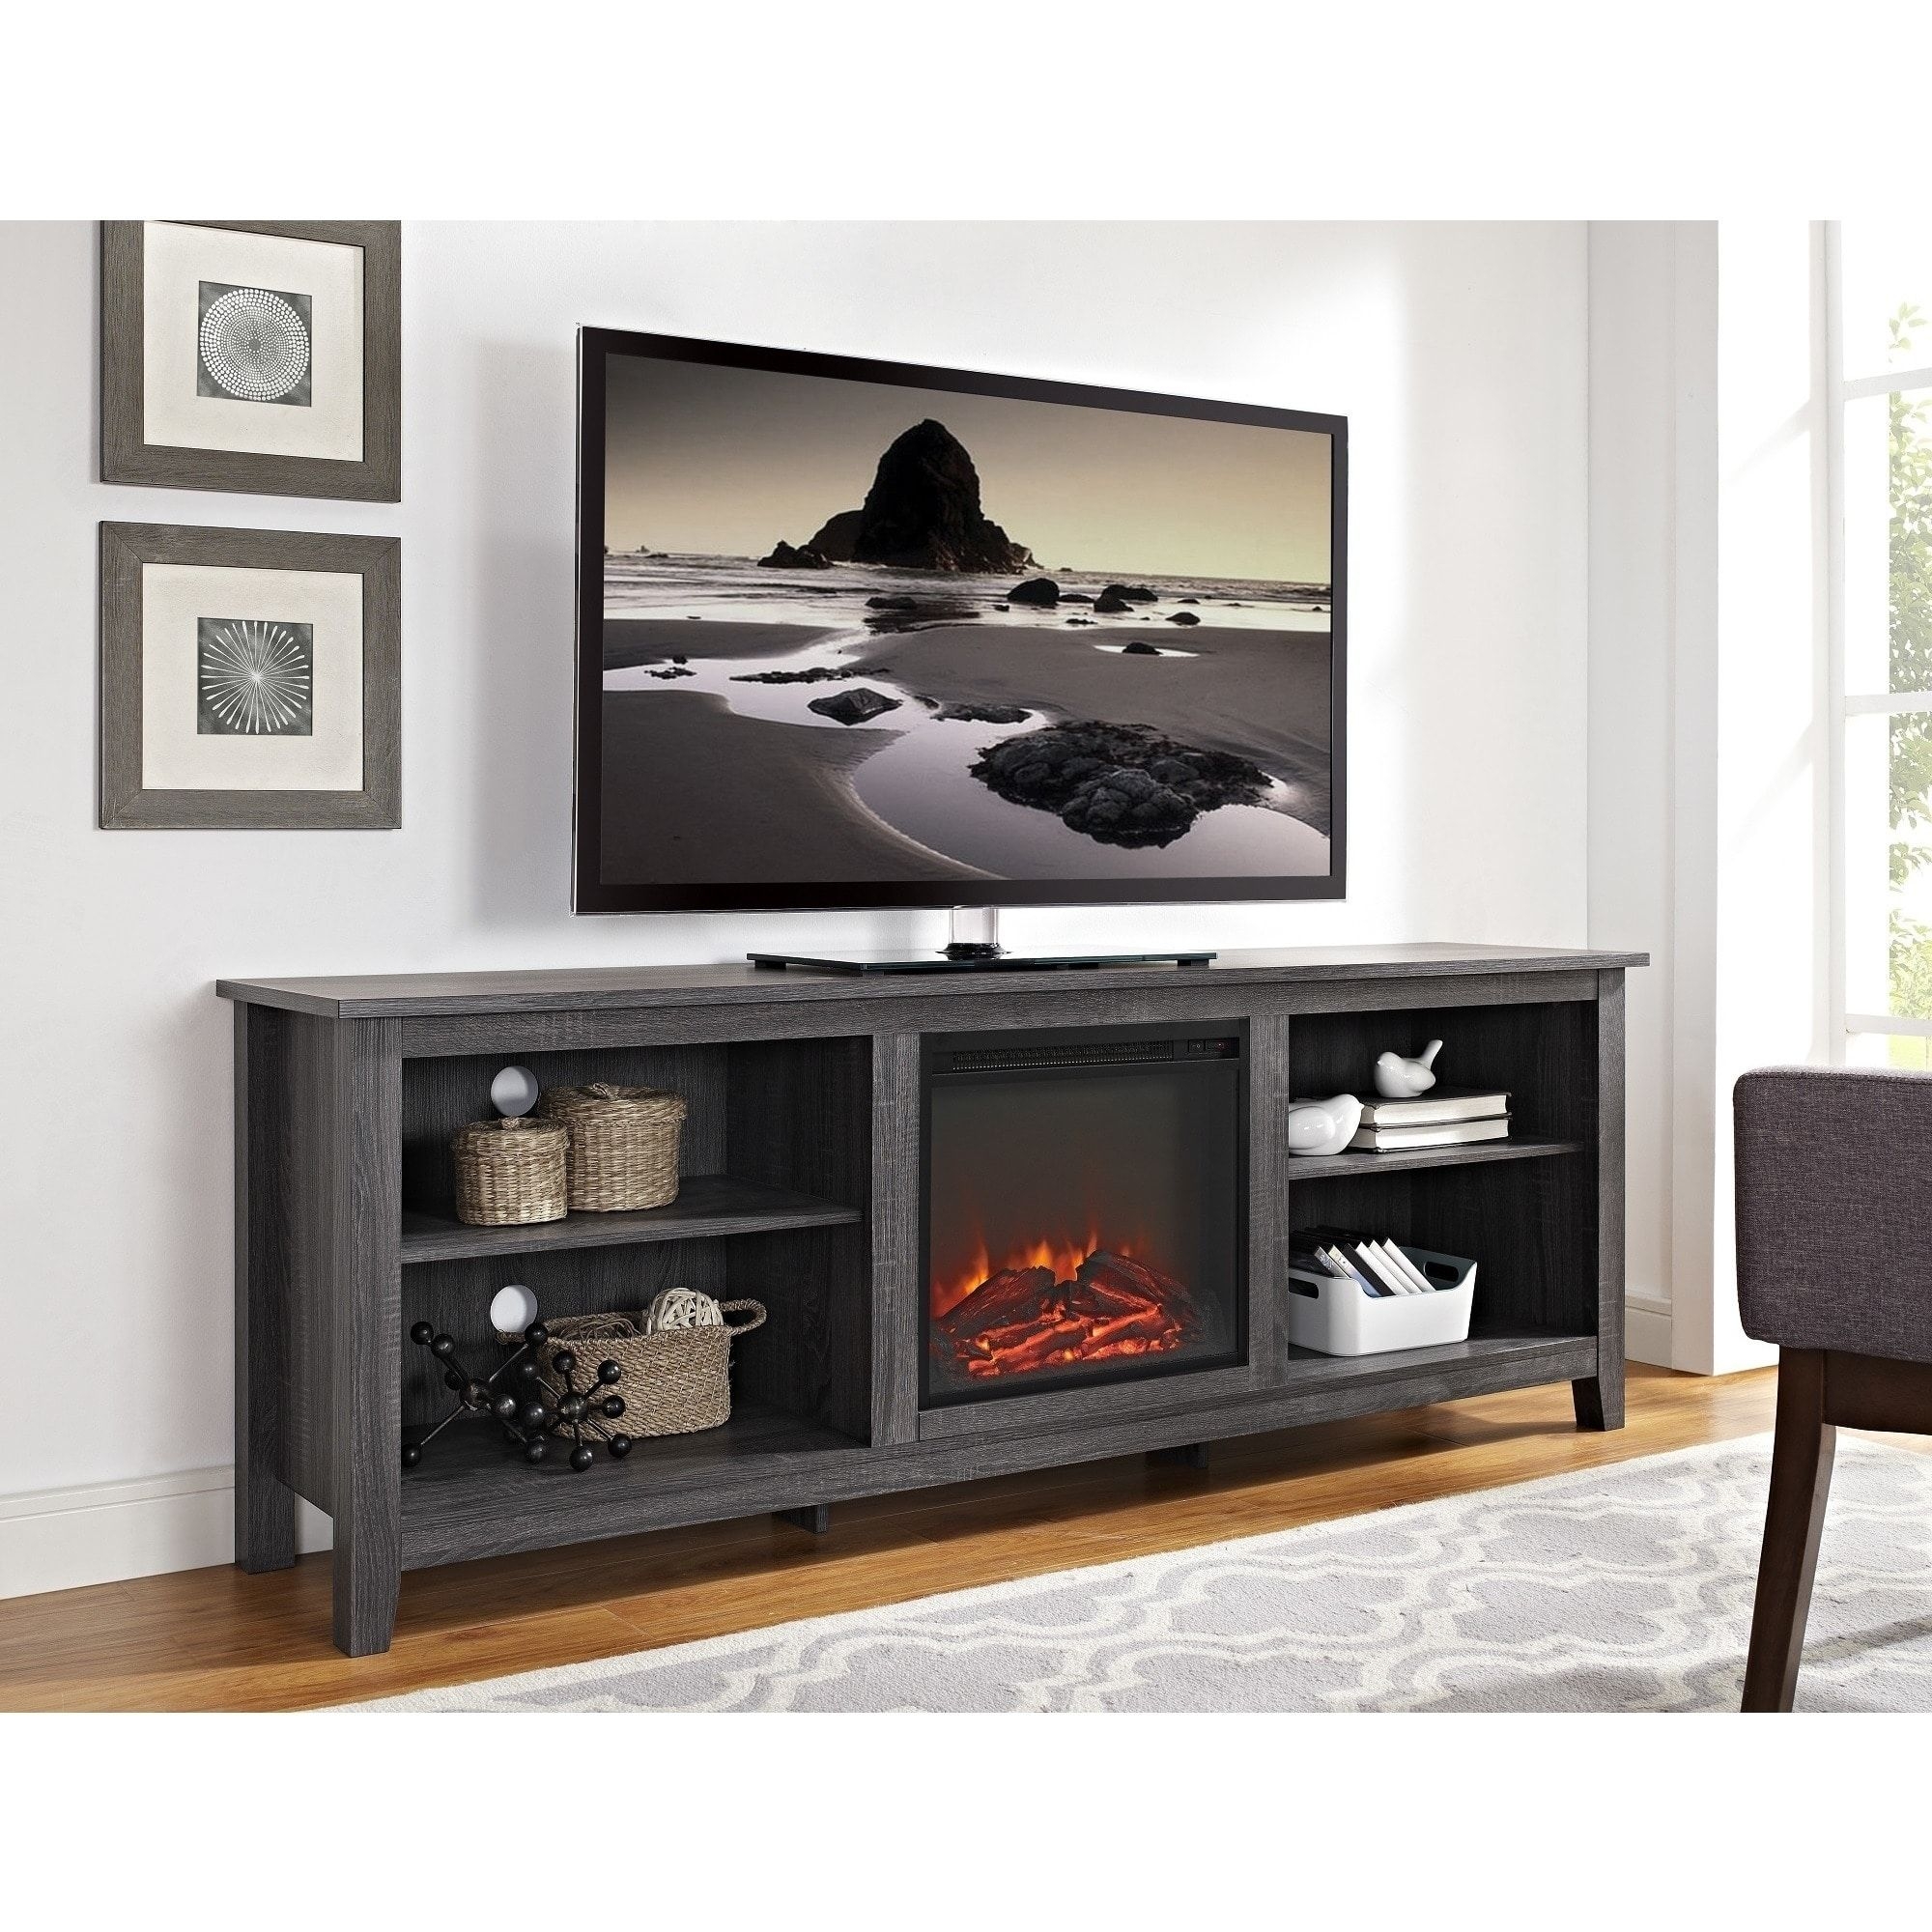 Amazon com new 70 inch wide television stand with